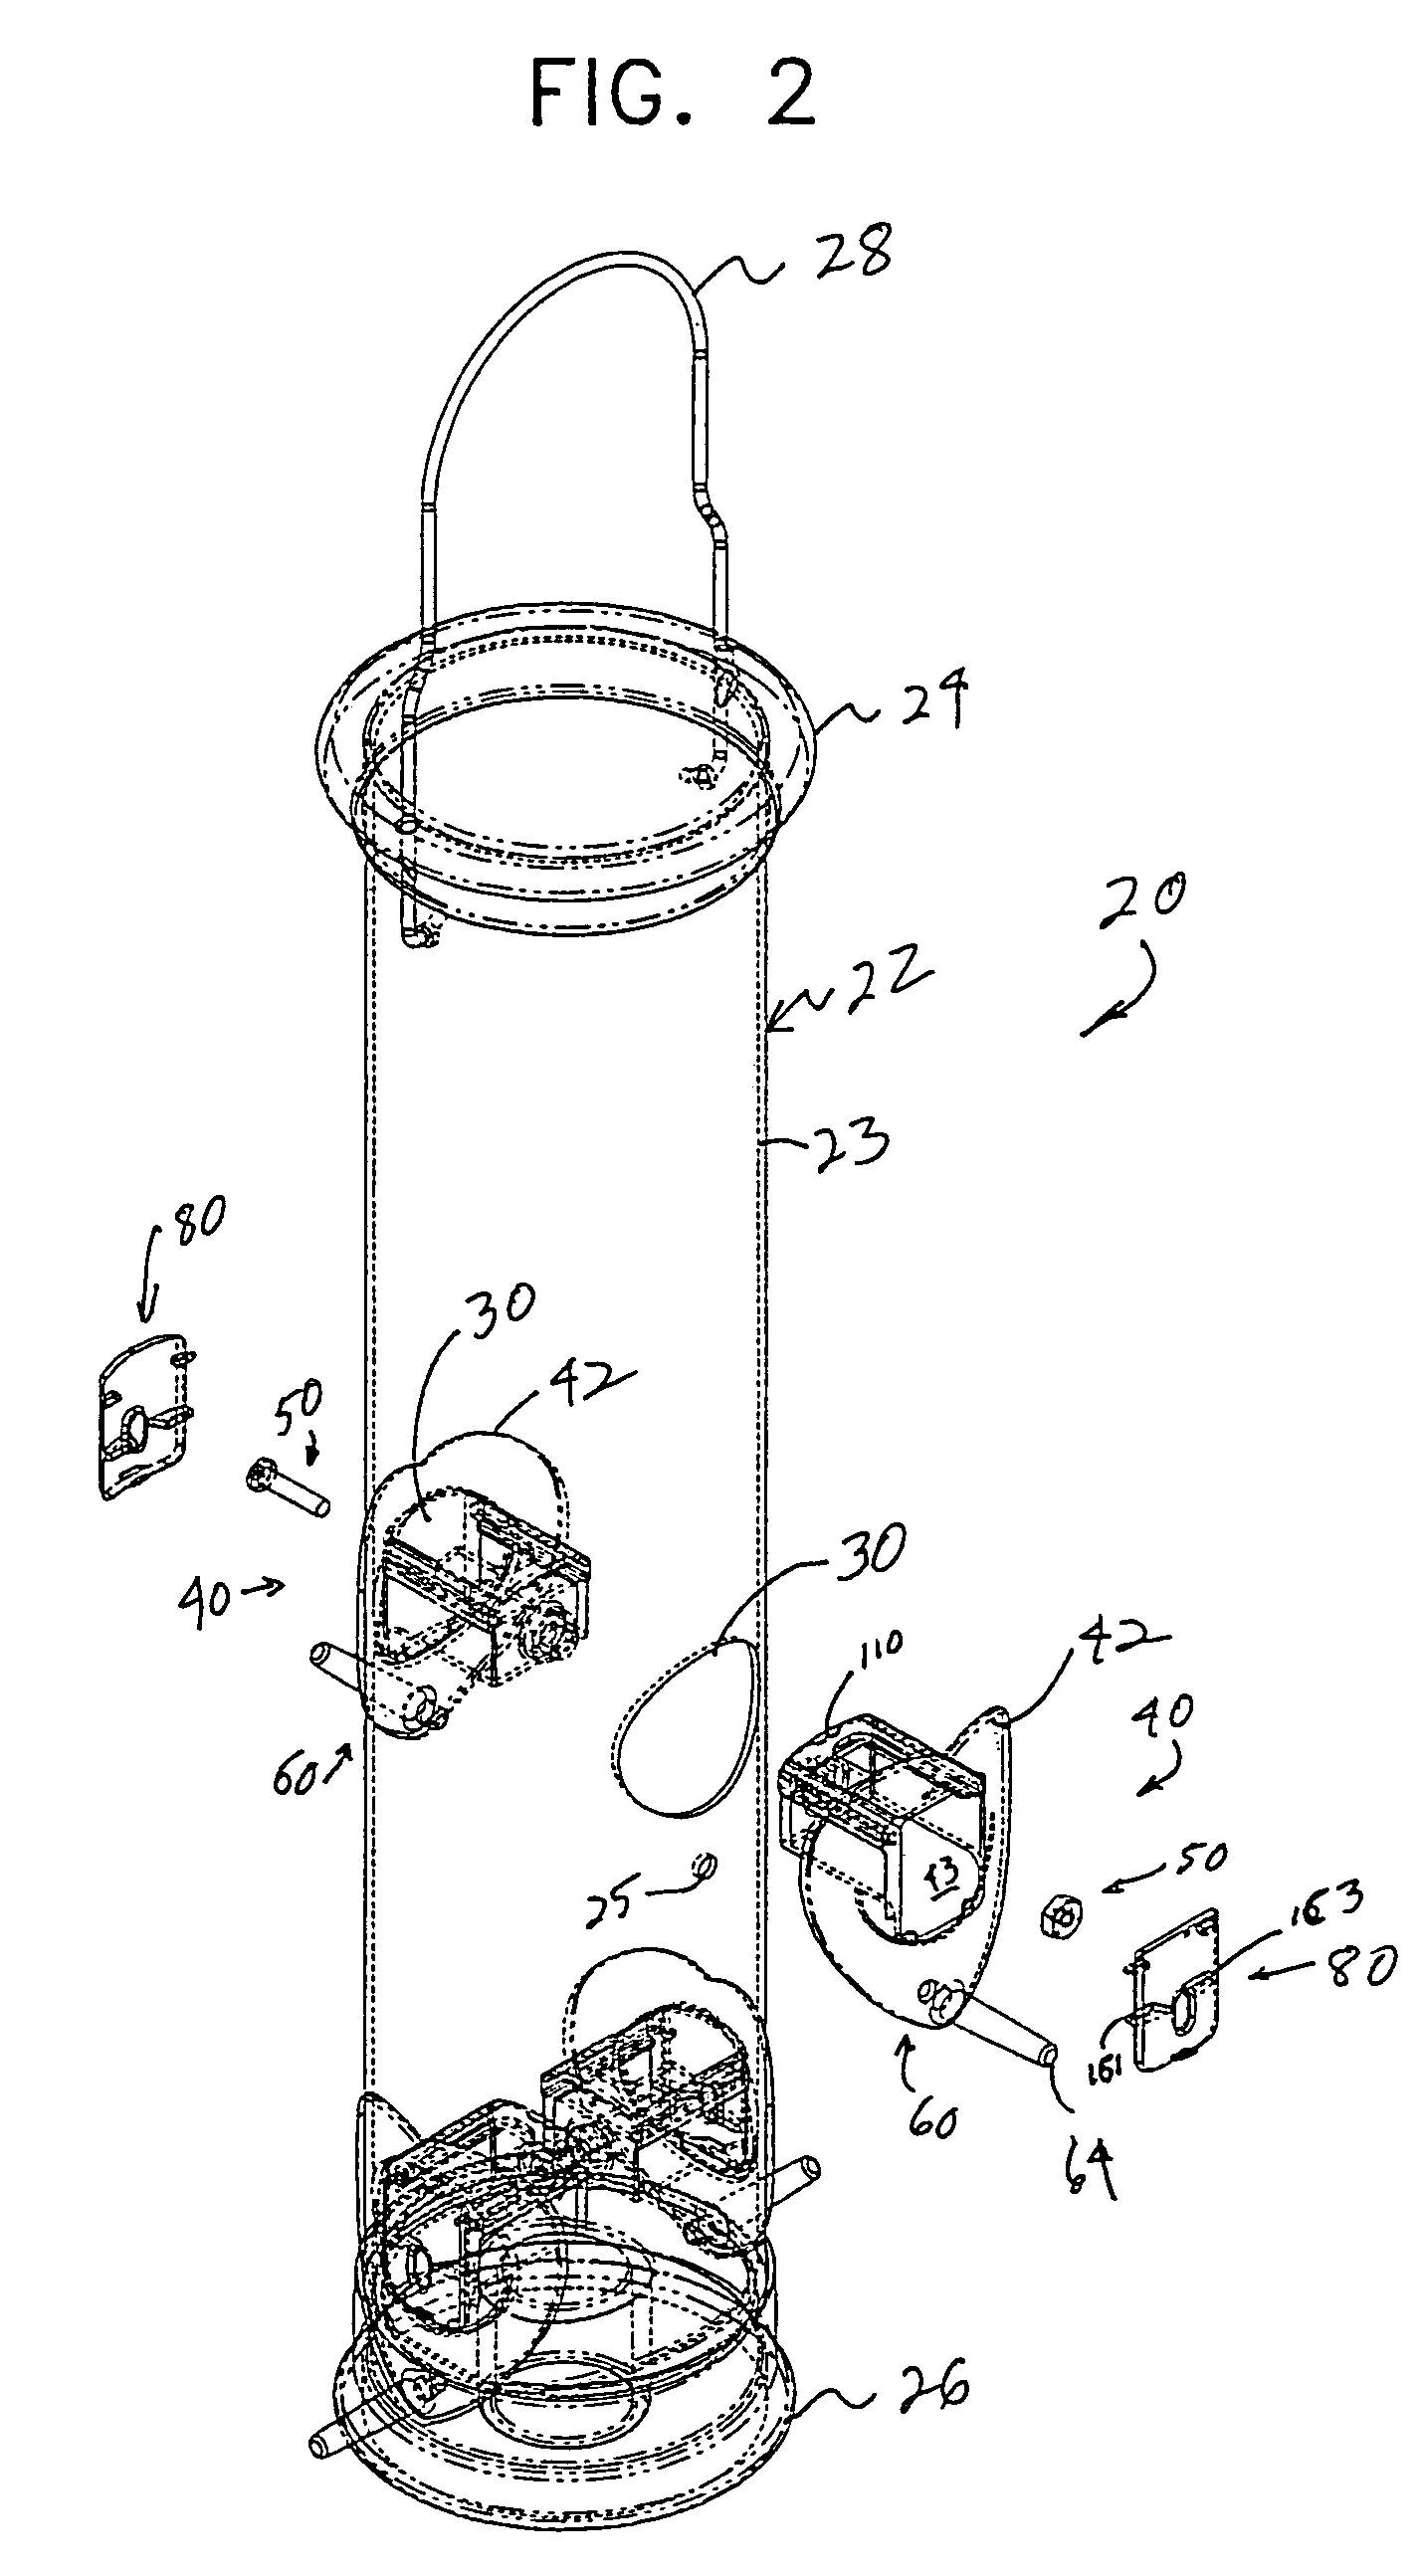 Convertible feed port assembly for bird feeders